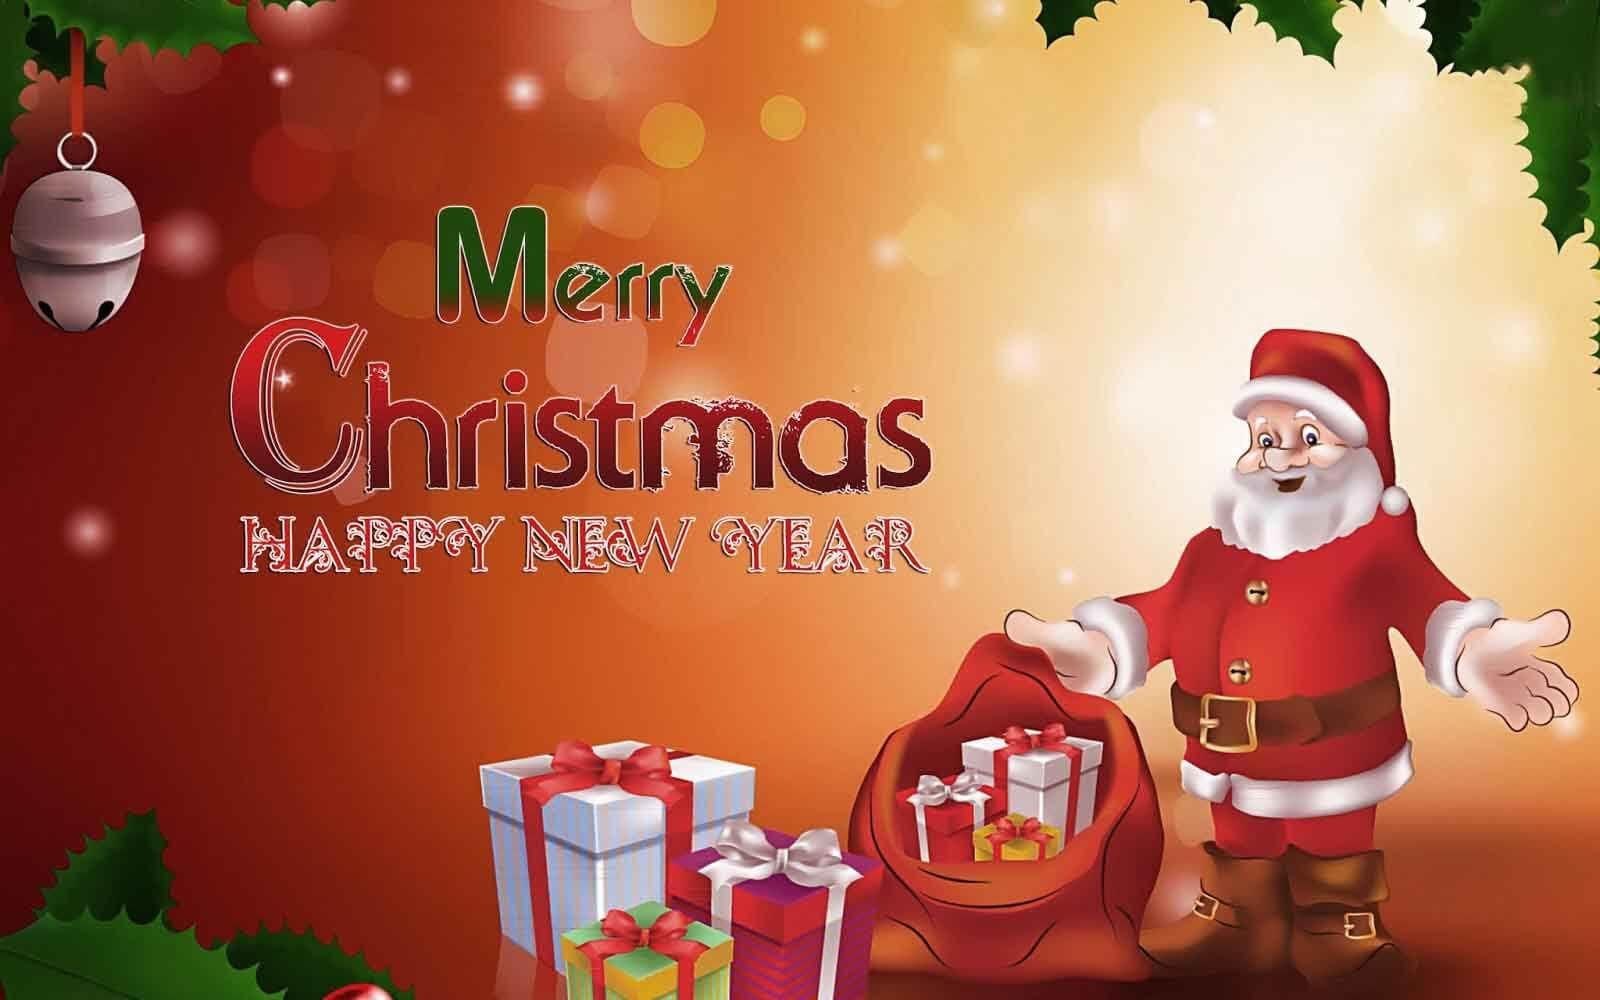 Christmas HD image wallpaper download. Happy merry